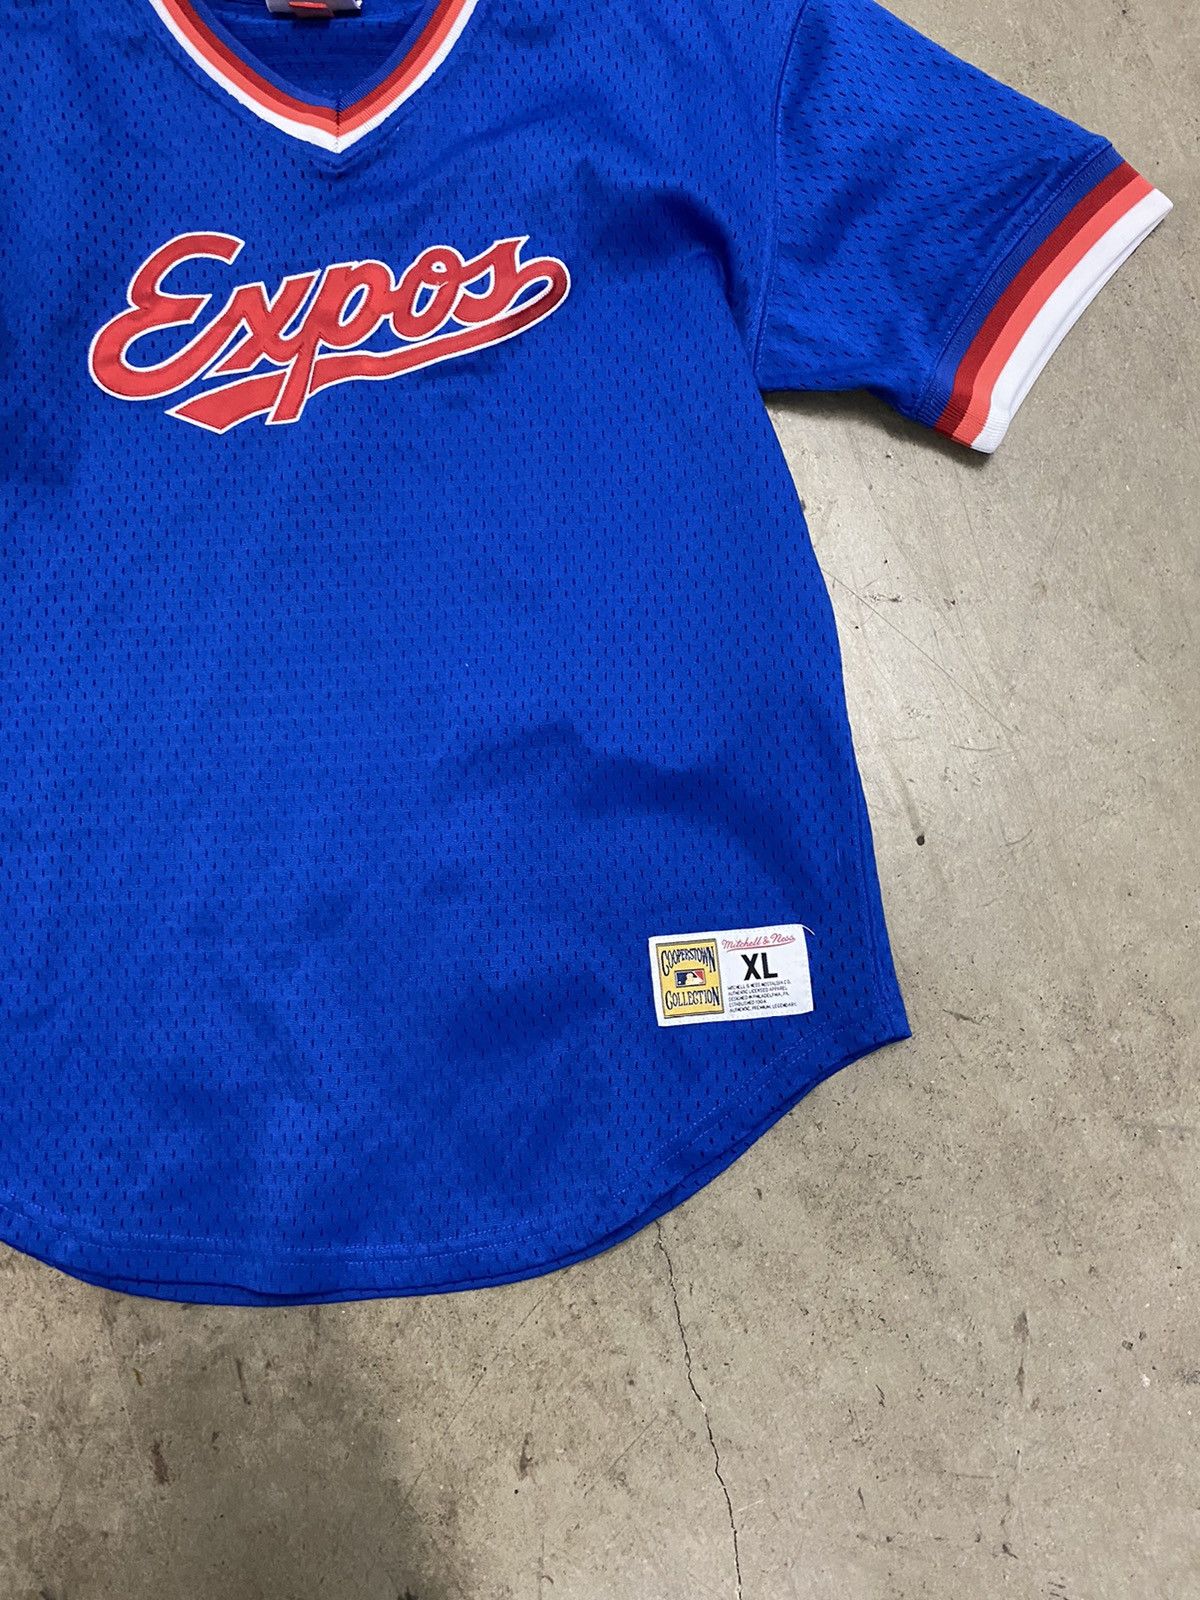 Vintage Mitchell and Ness Expos Jersey Nationals Kids XL Mens Small Size US S / EU 44-46 / 1 - 2 Preview